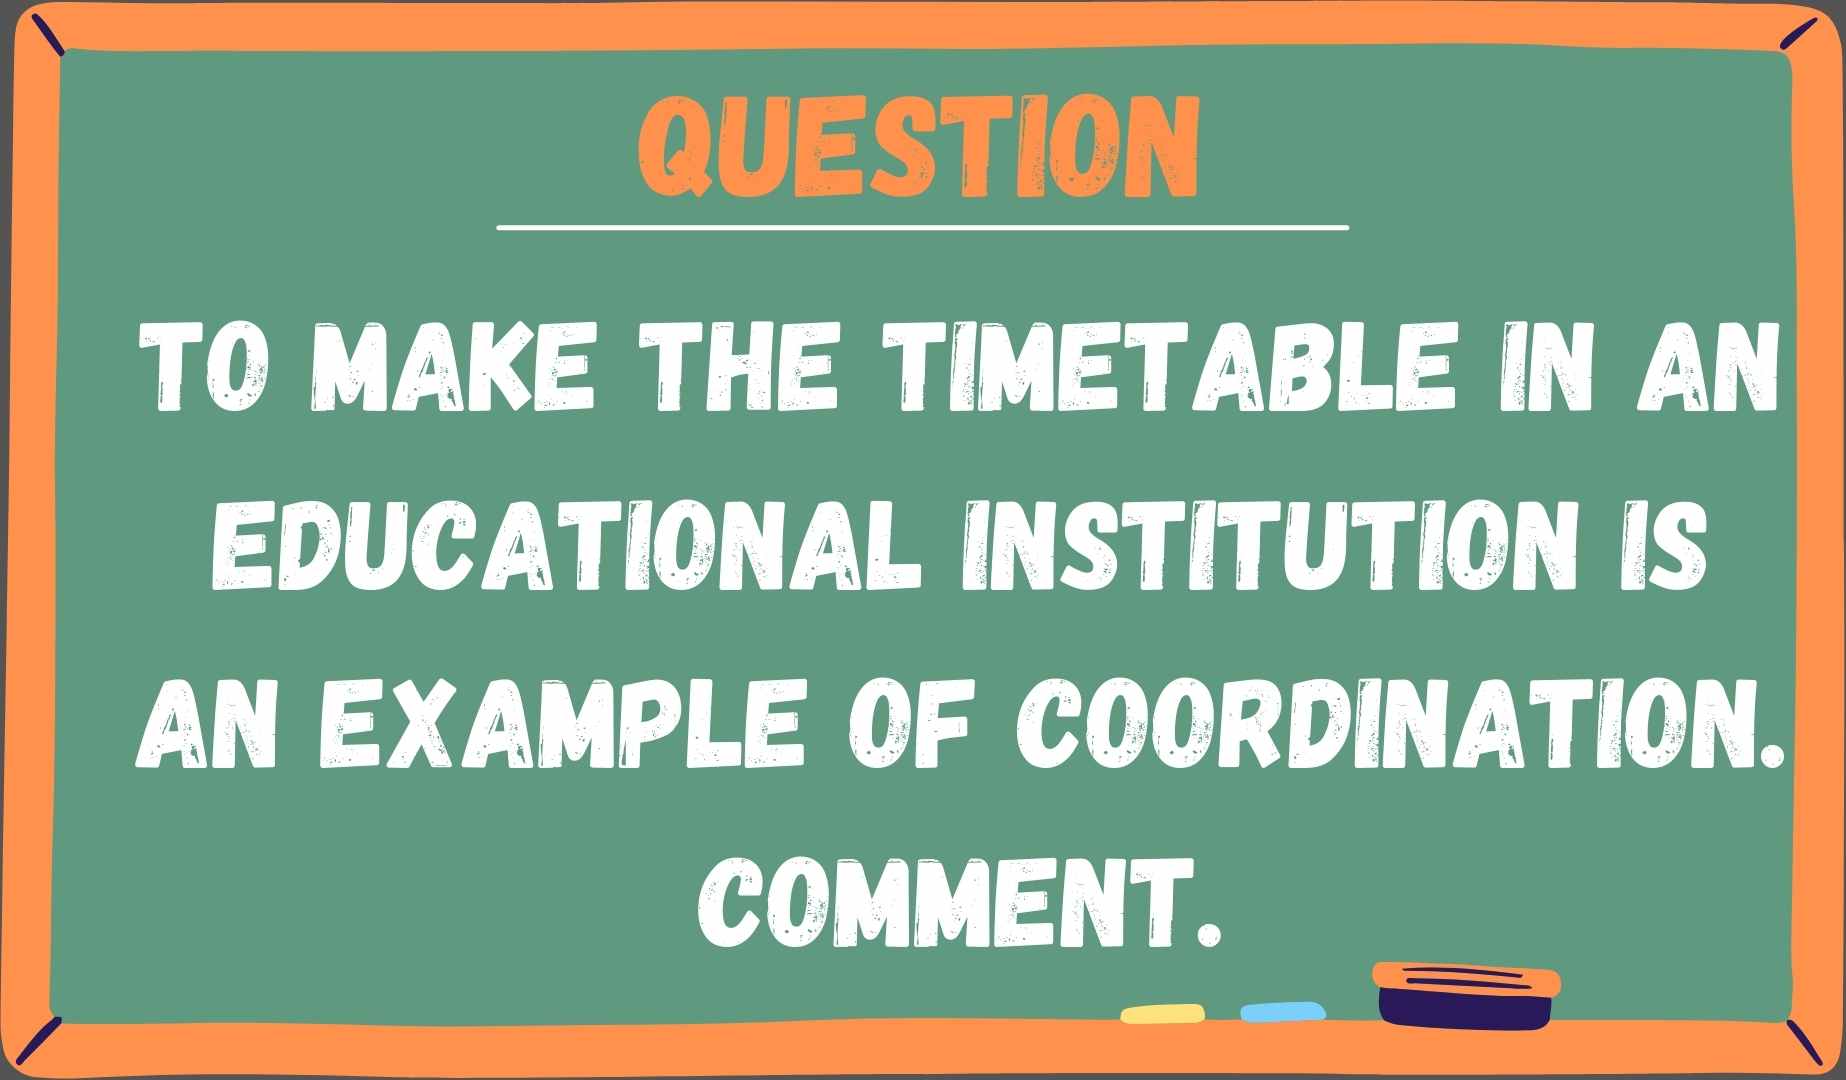 To make the timetable in an educational institution is an example of coordination. Comment